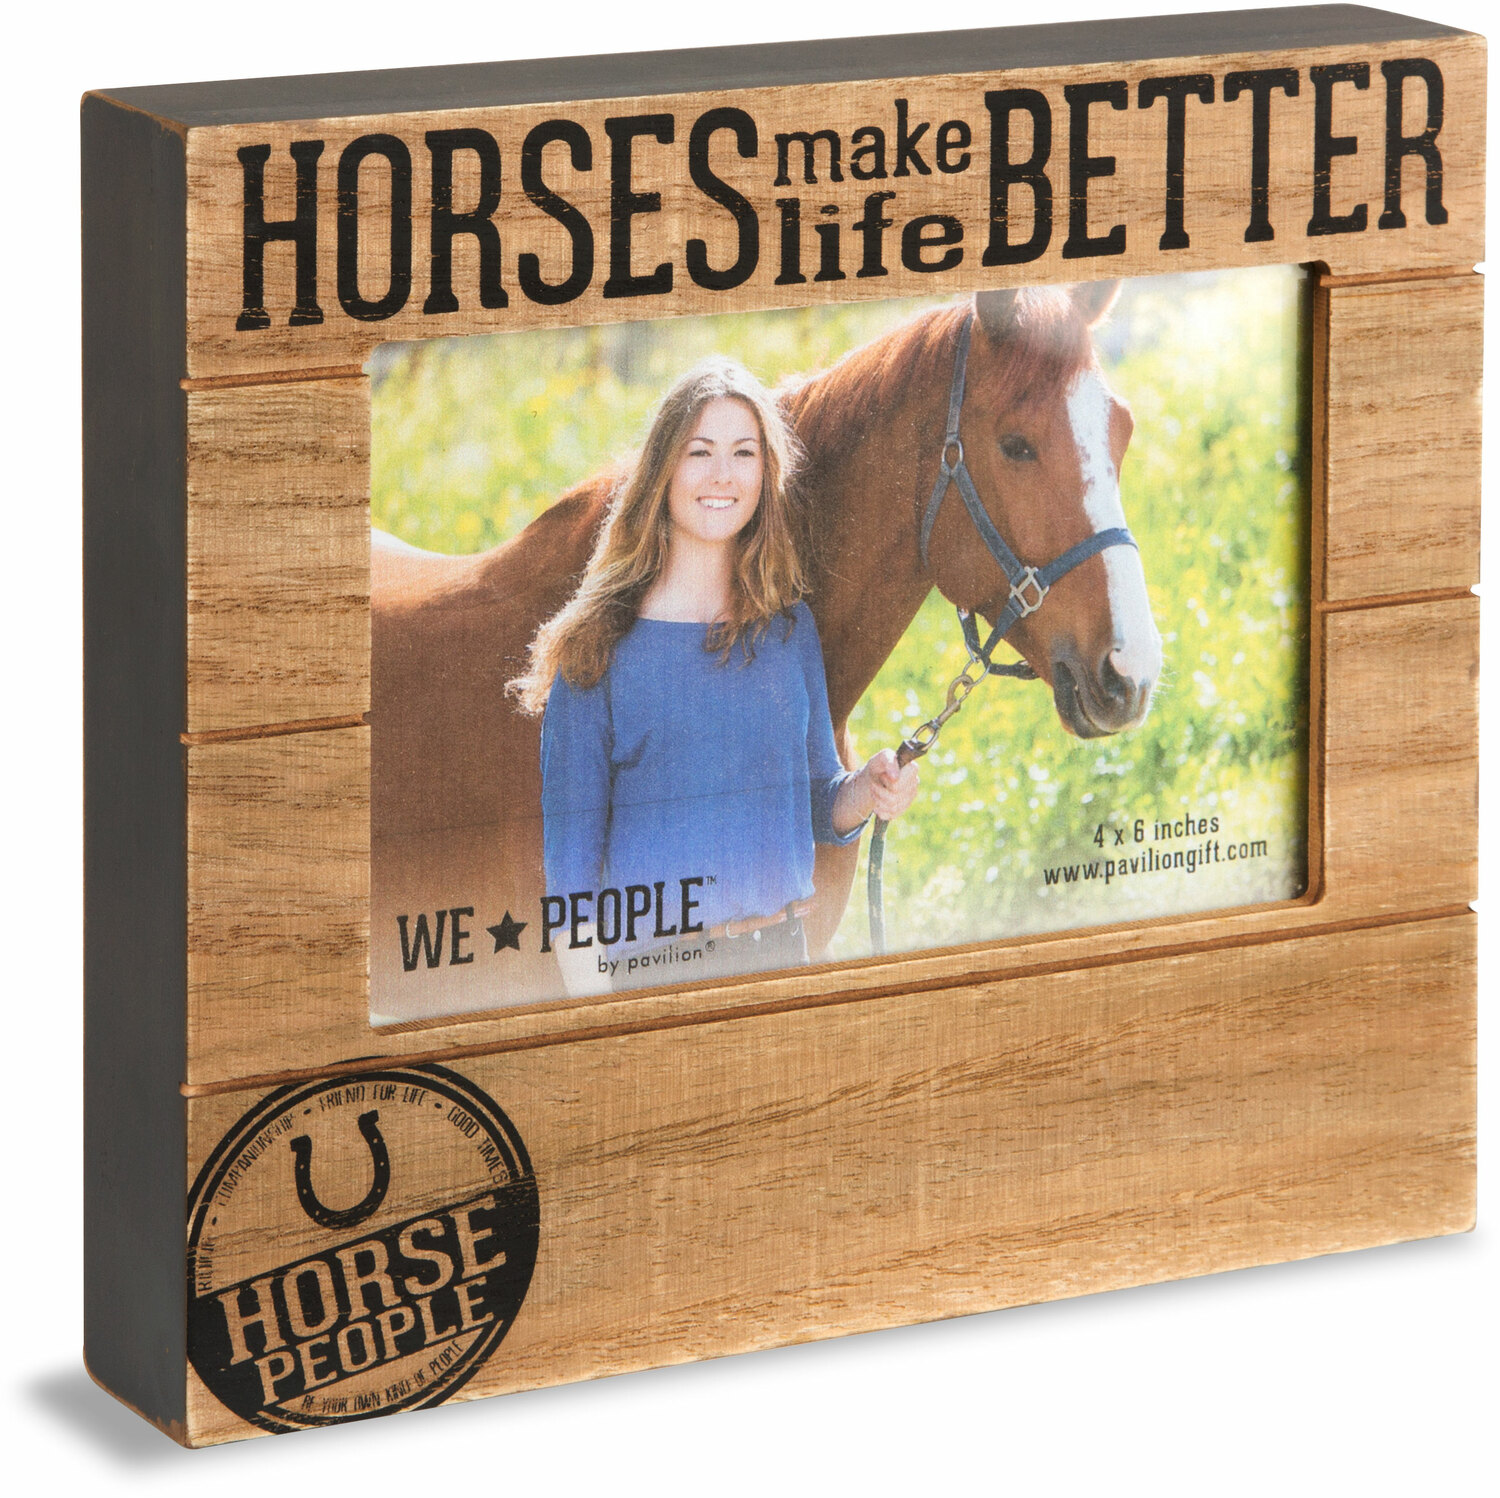 Horse People by We People - Horse People - 6.75" x 7.5" Frame (Holds 4" x 6" photo)